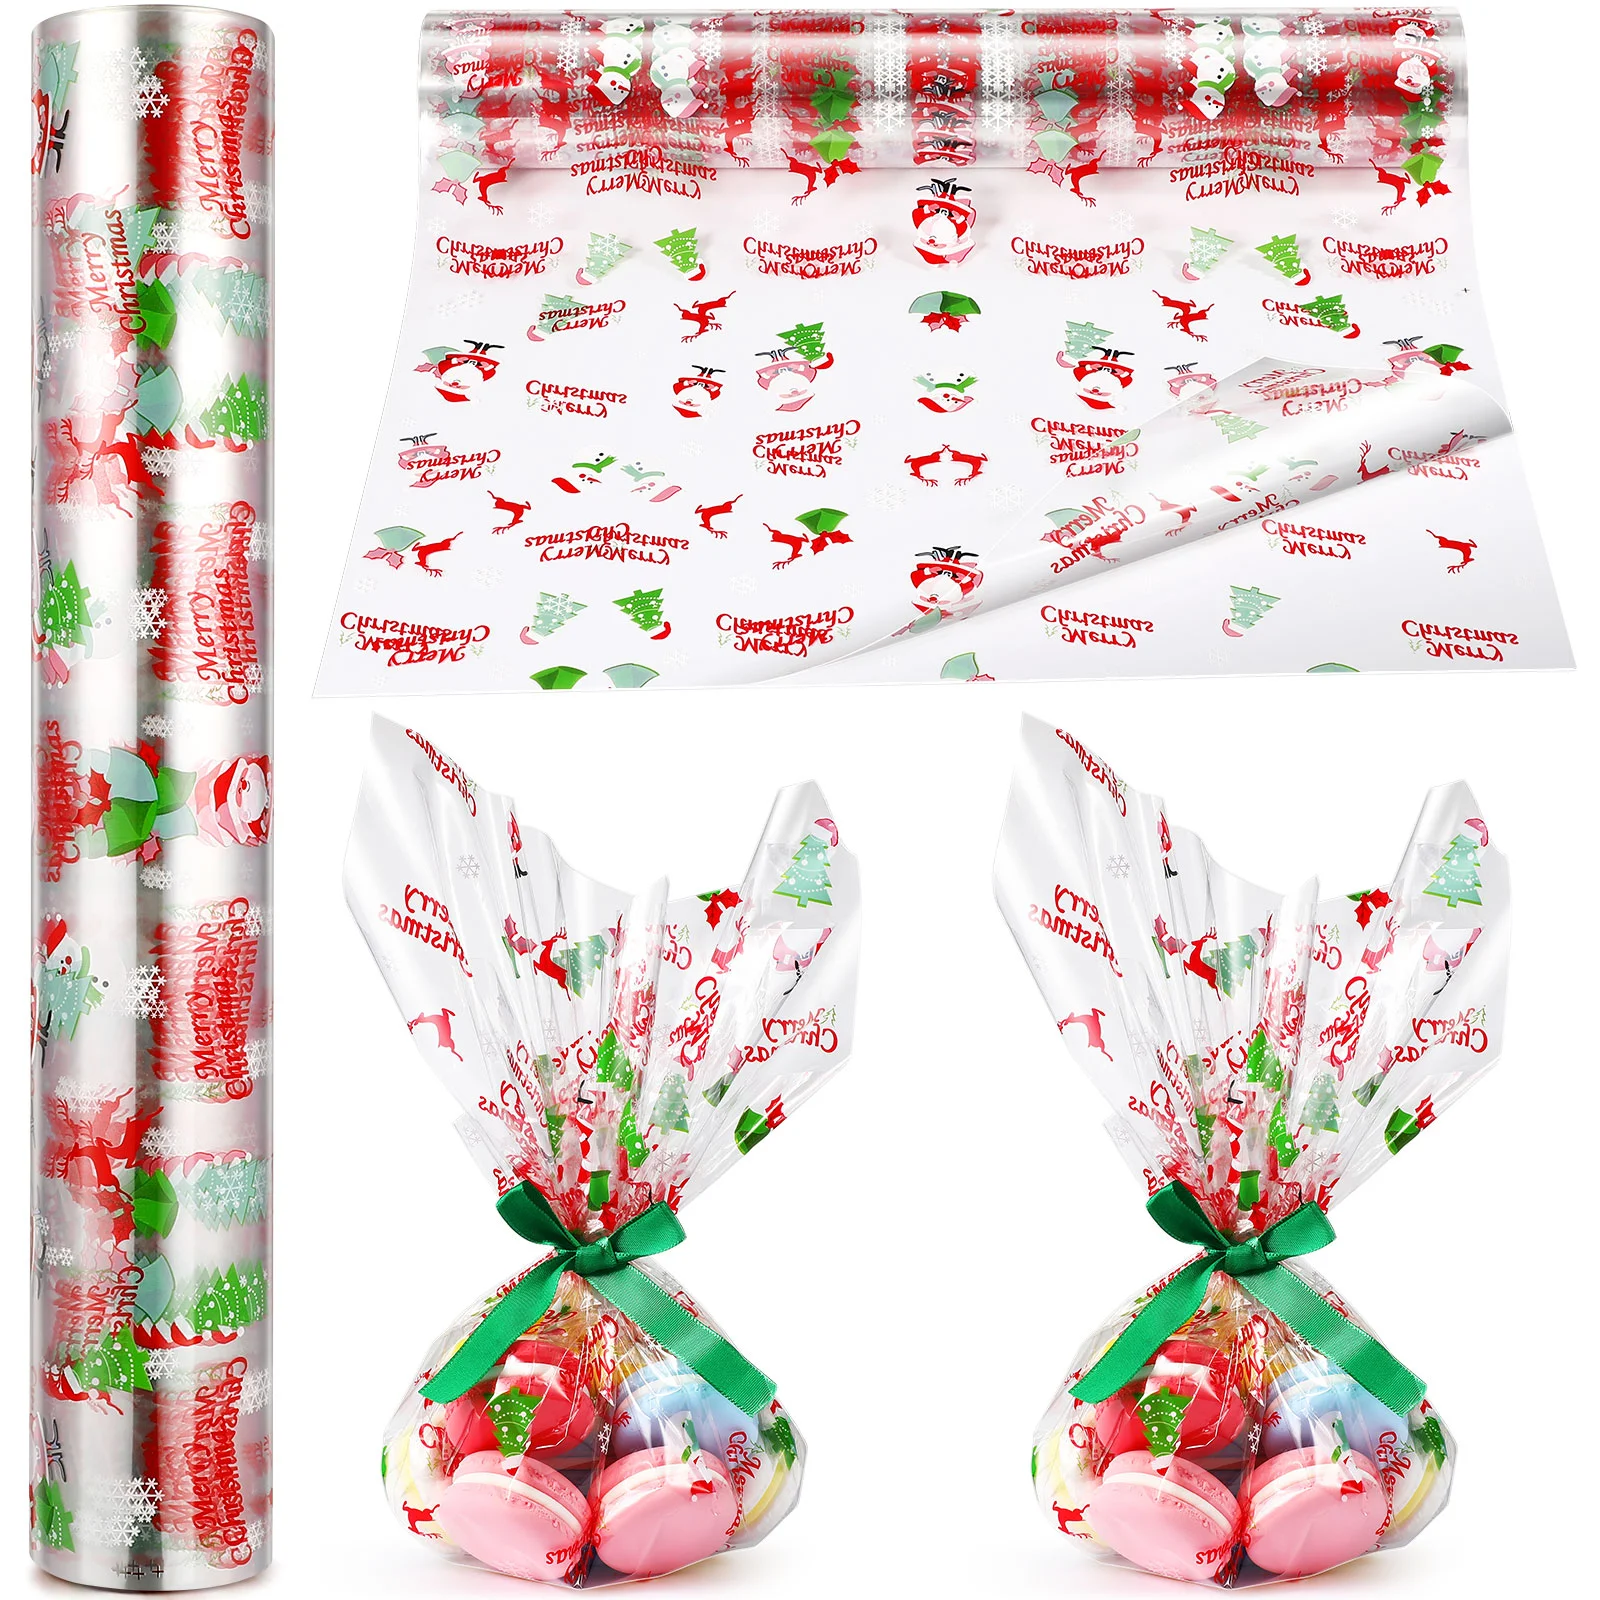 

Cellophane Wrap Paper Wrapping Christmas Roll Clear Gift Wrapper Sheetxmas Transparentbaskets Basket Packing Flowerssantarolls